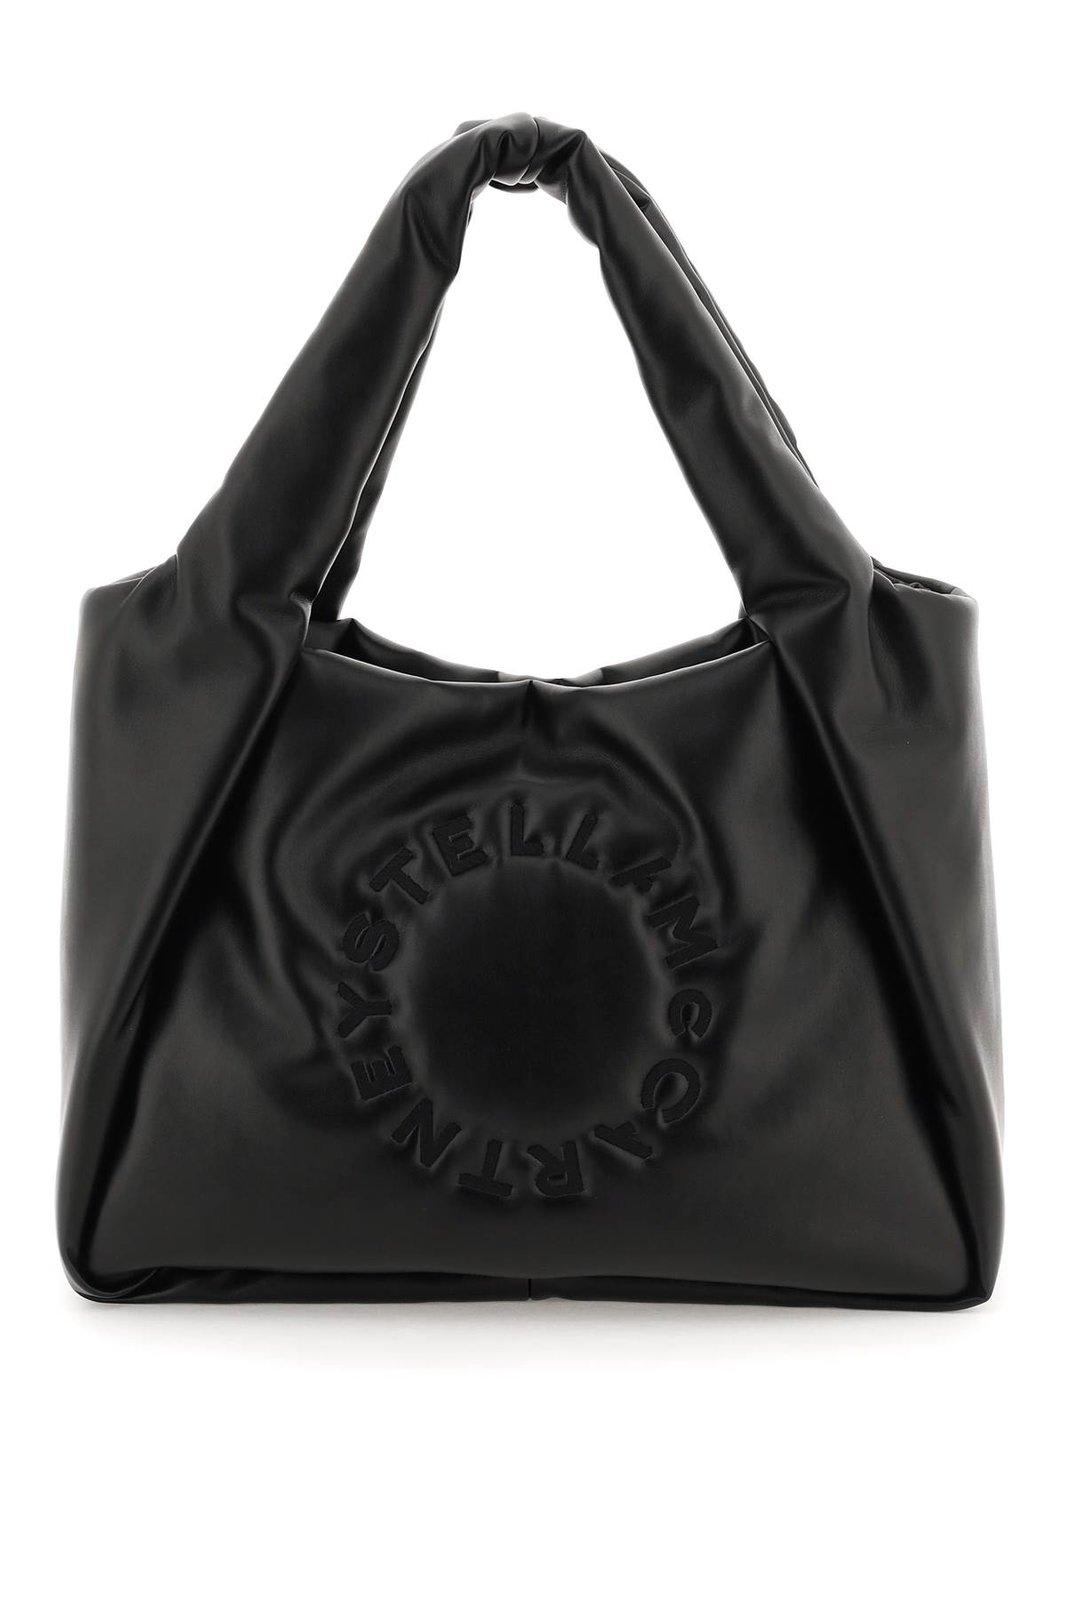 STELLA MCCARTNEY LOGO EMBROIDERED PUFFY TOTE BAG